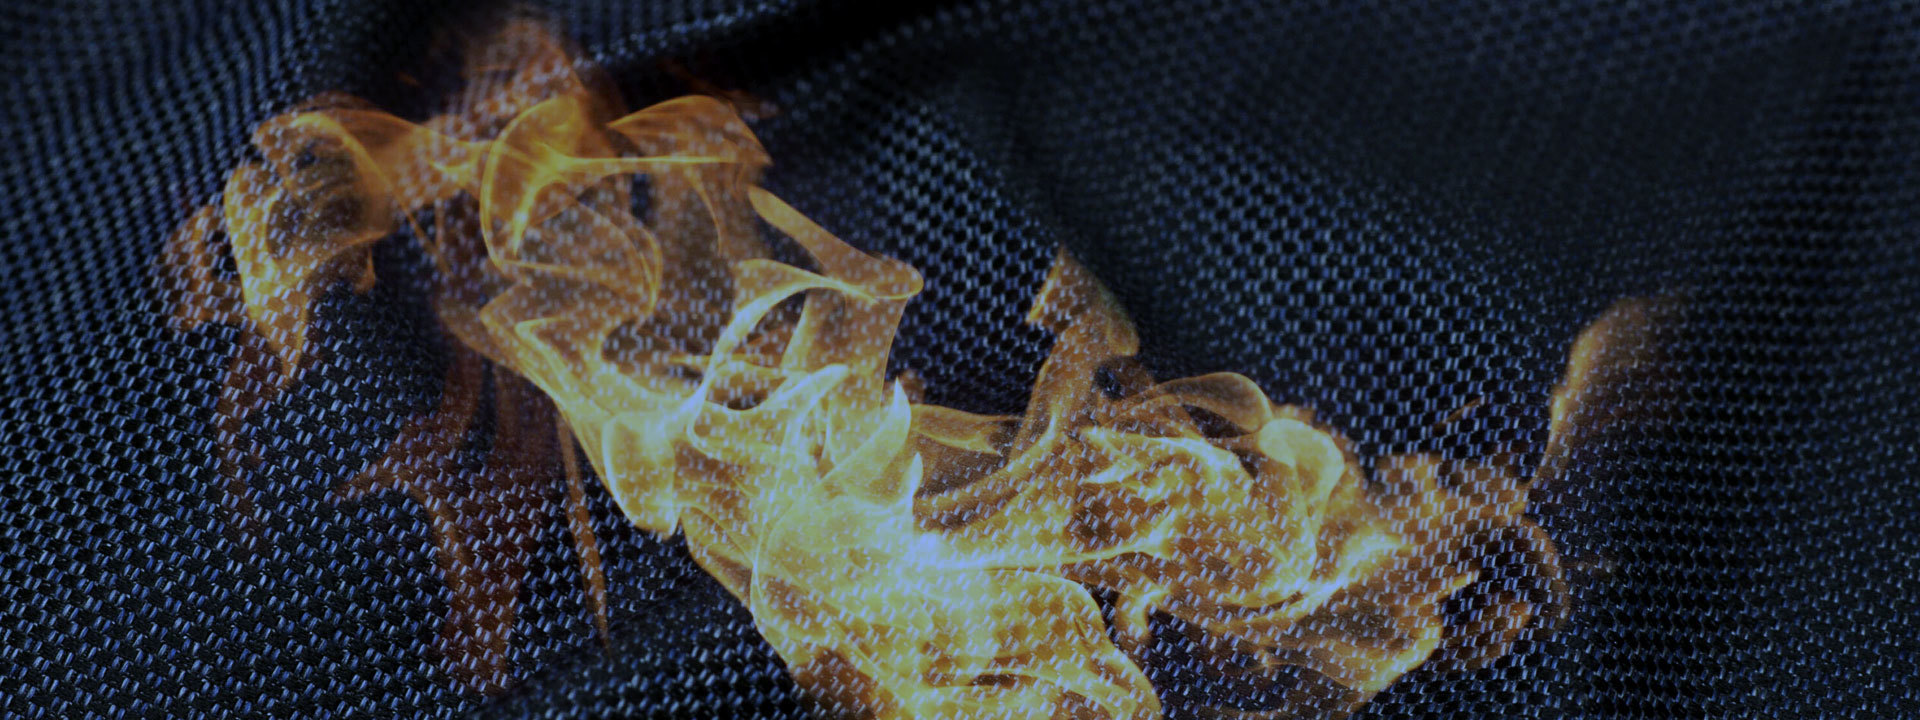 R & D and manufacture of flame retardants